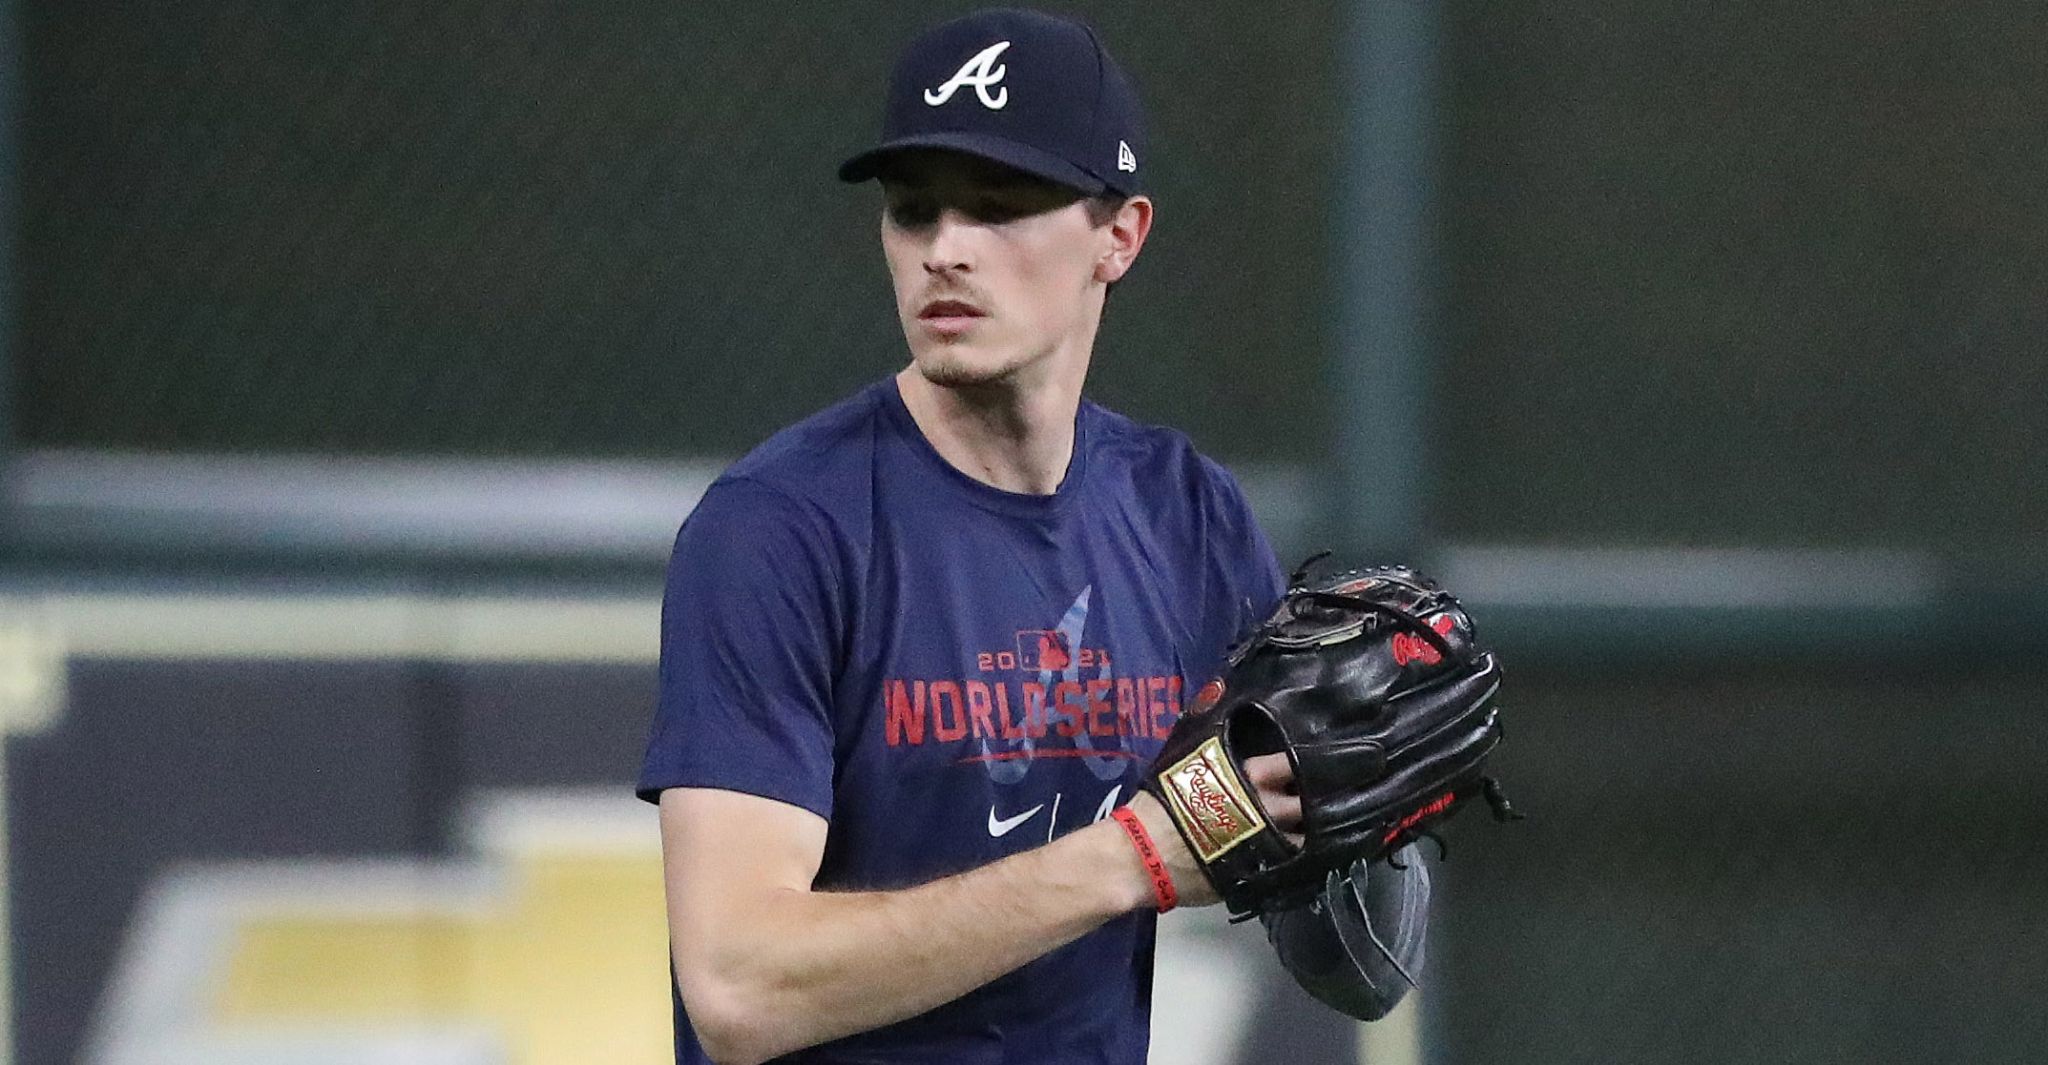 Braves, Max Fried hope to bring home a championship in Game 6